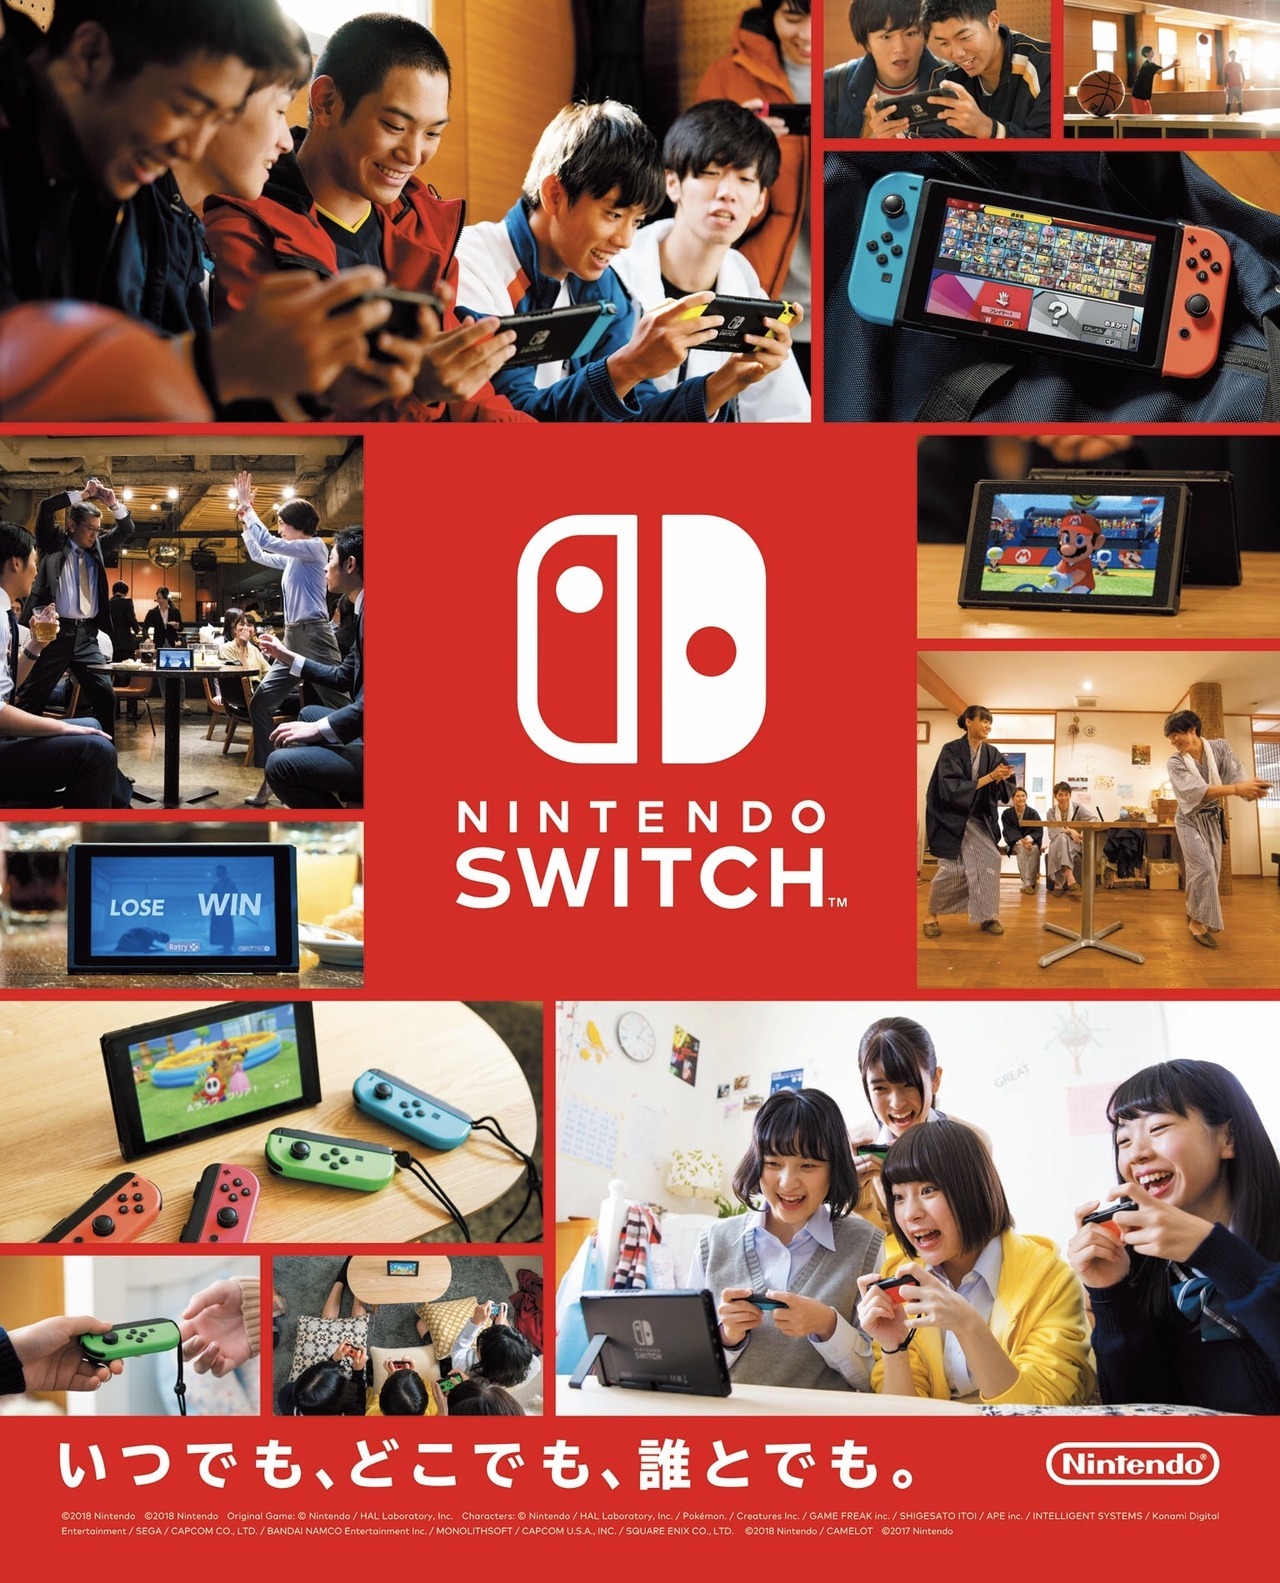 Famitsu Print Ad Switch “anytime Anywhere With Anyone” The